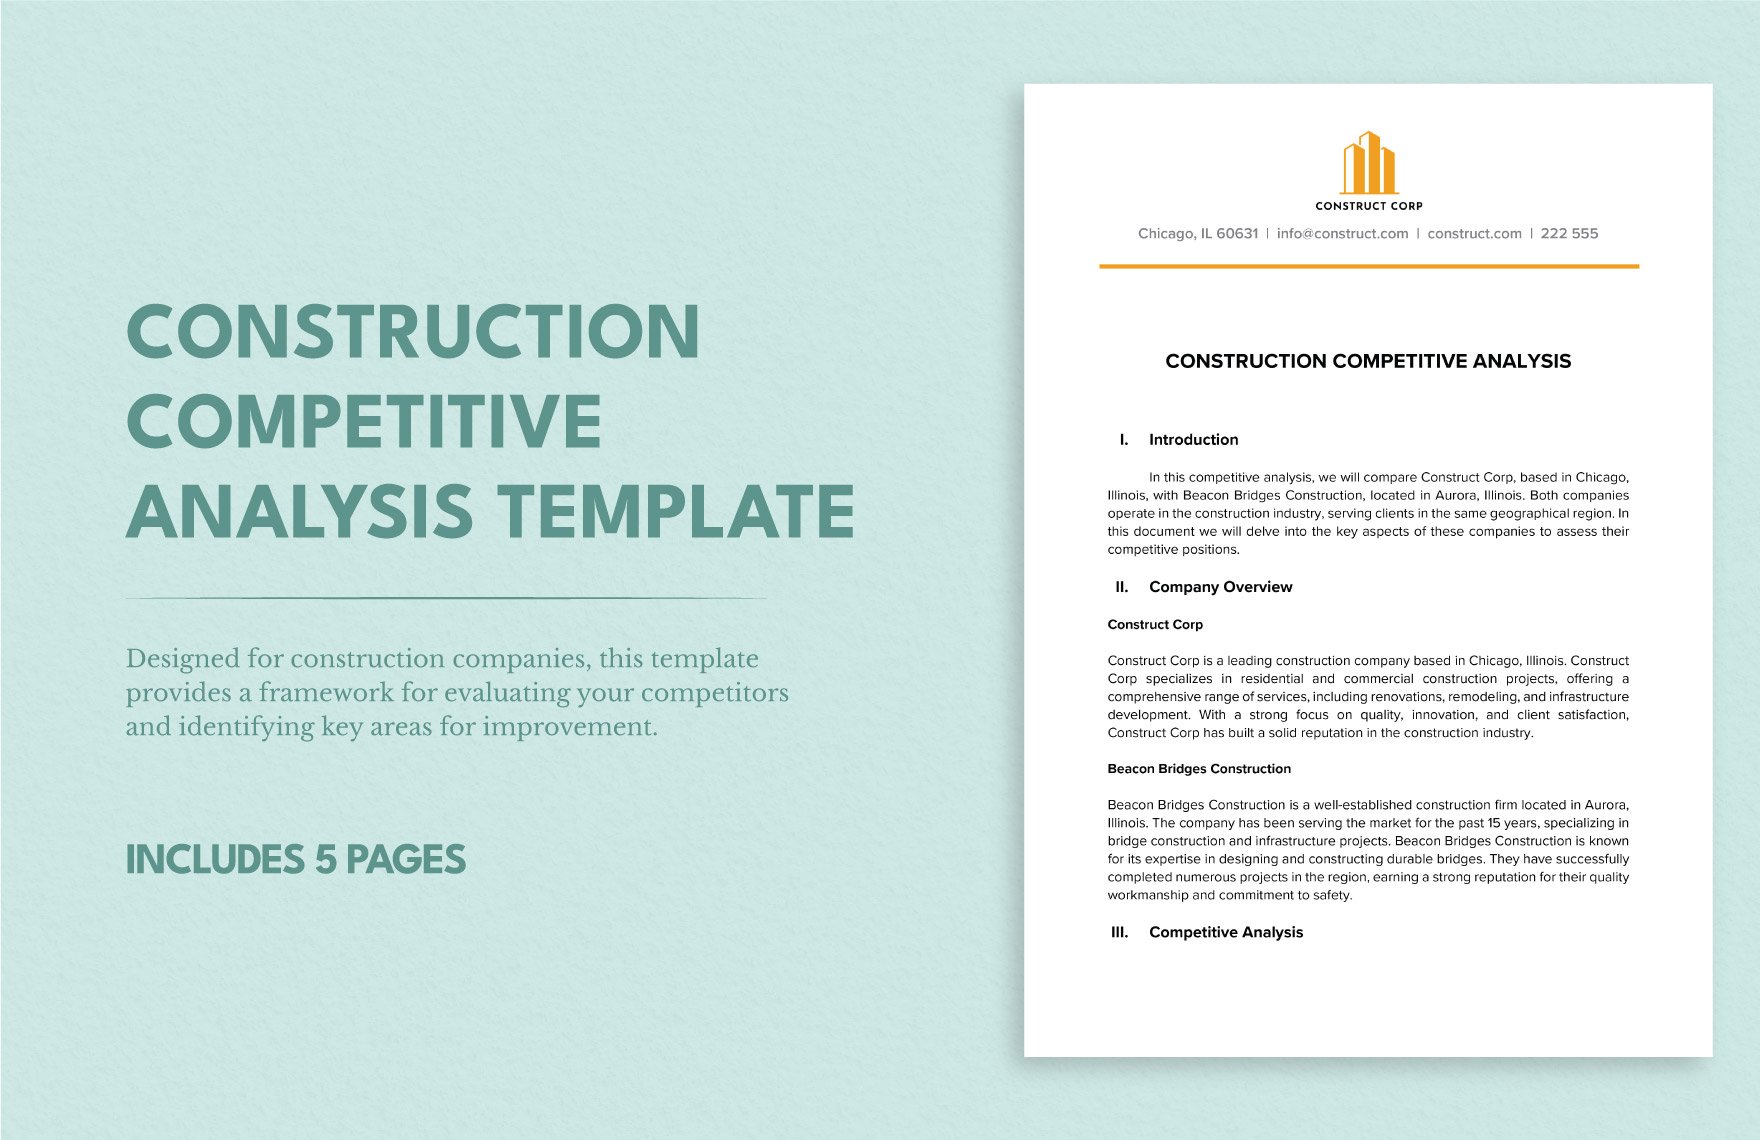 Construction Competitive Analysis Template